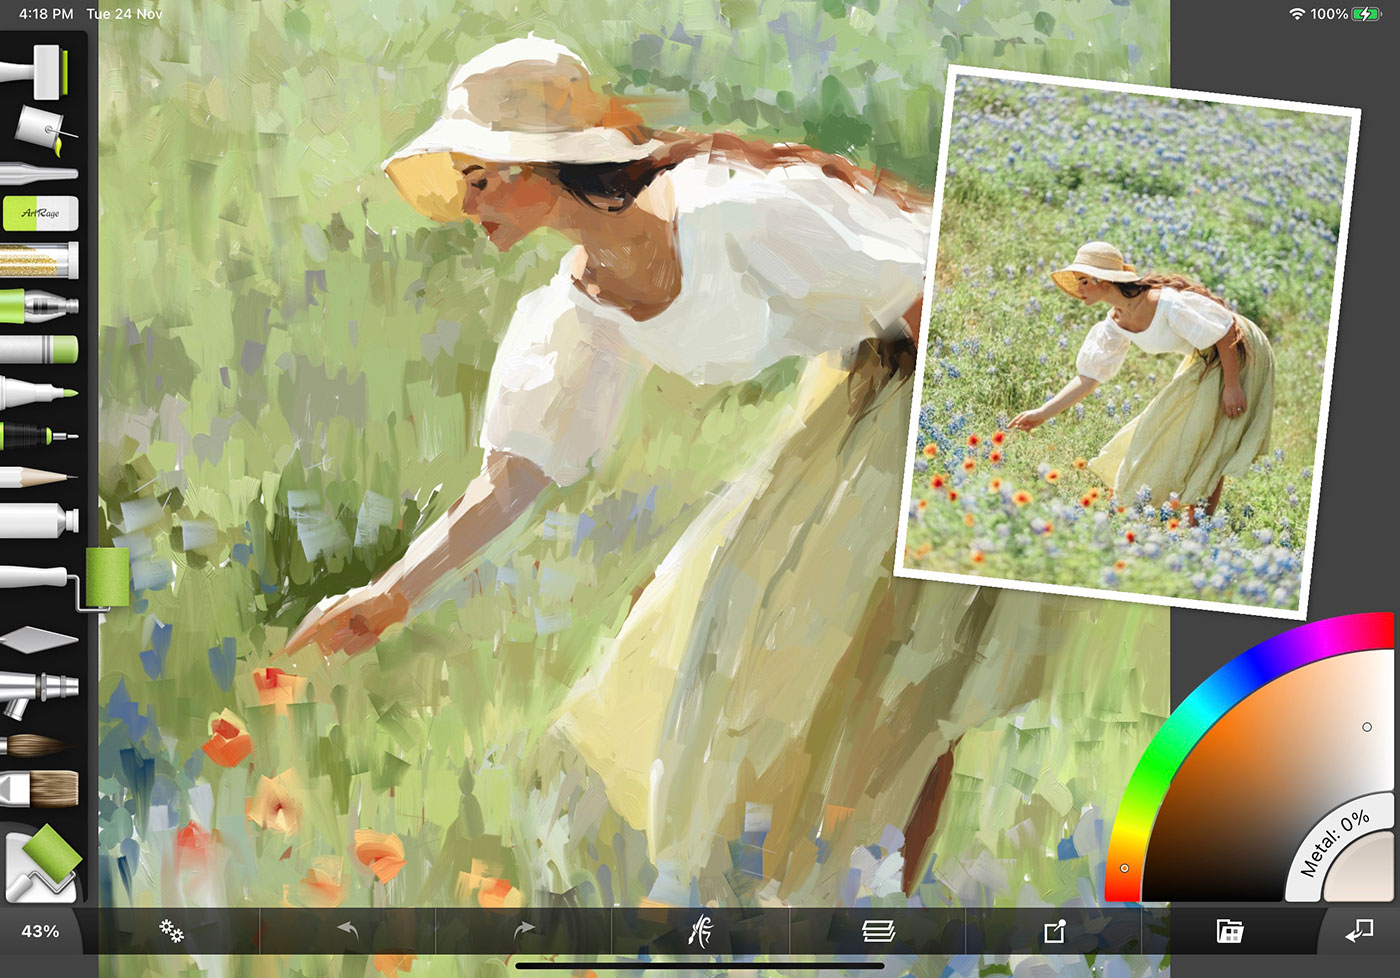 iPad app showing painting of a woman picking flowers in a field